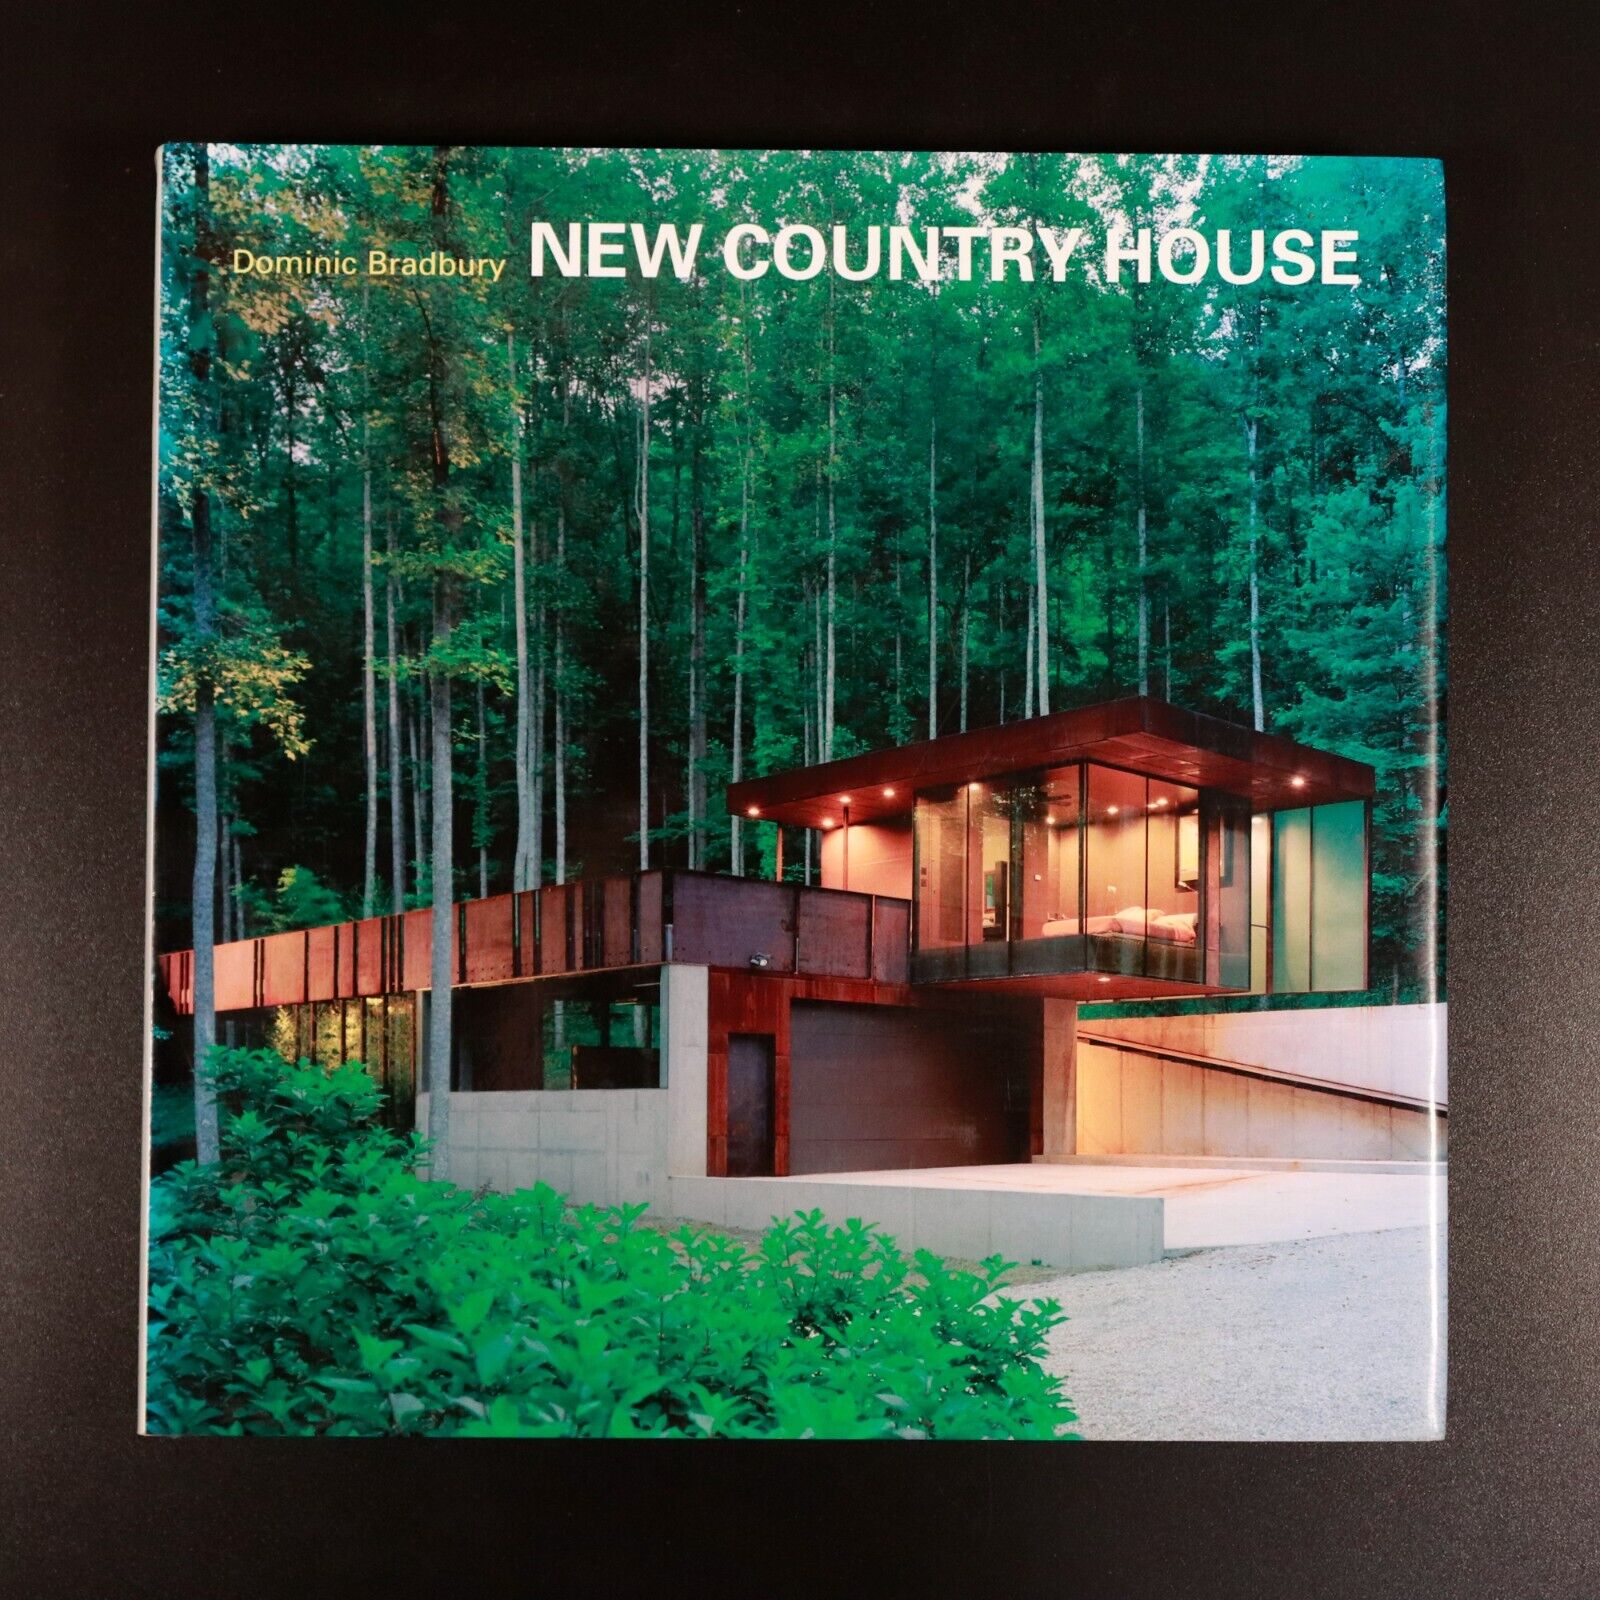 2005 New Country House by Dominic Bradbury Architecture Reference Book